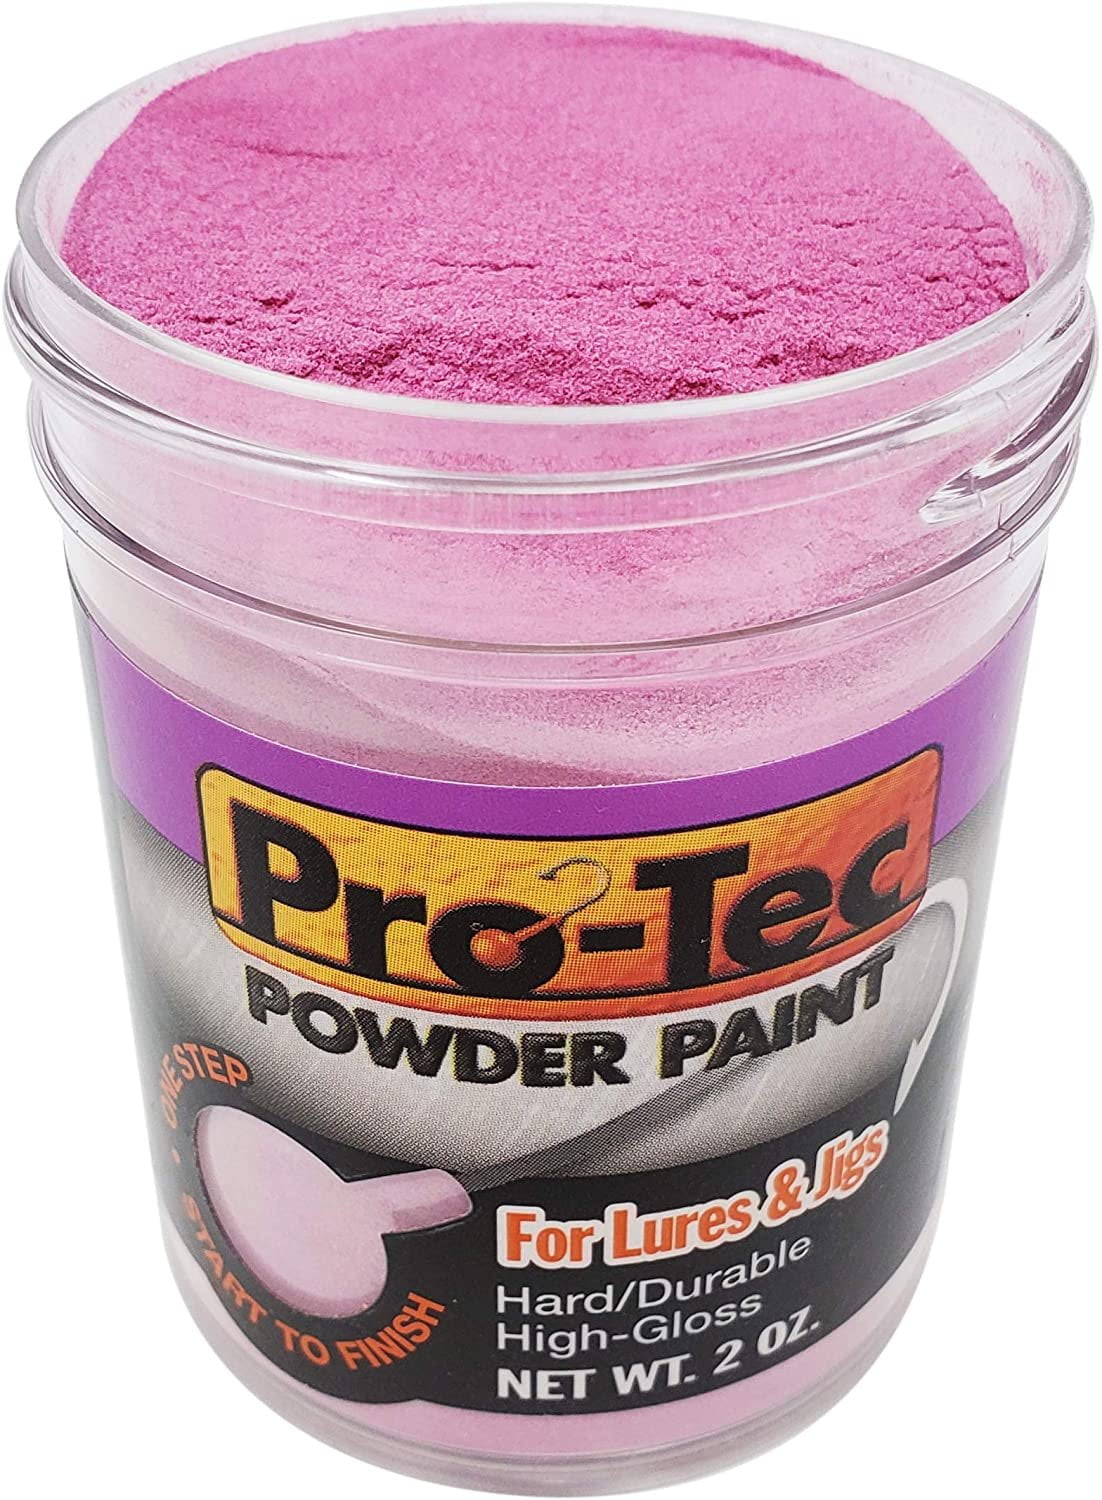 Pro-Tec Jigs and Lures Powder Paint, Jig Head Fishing Paint